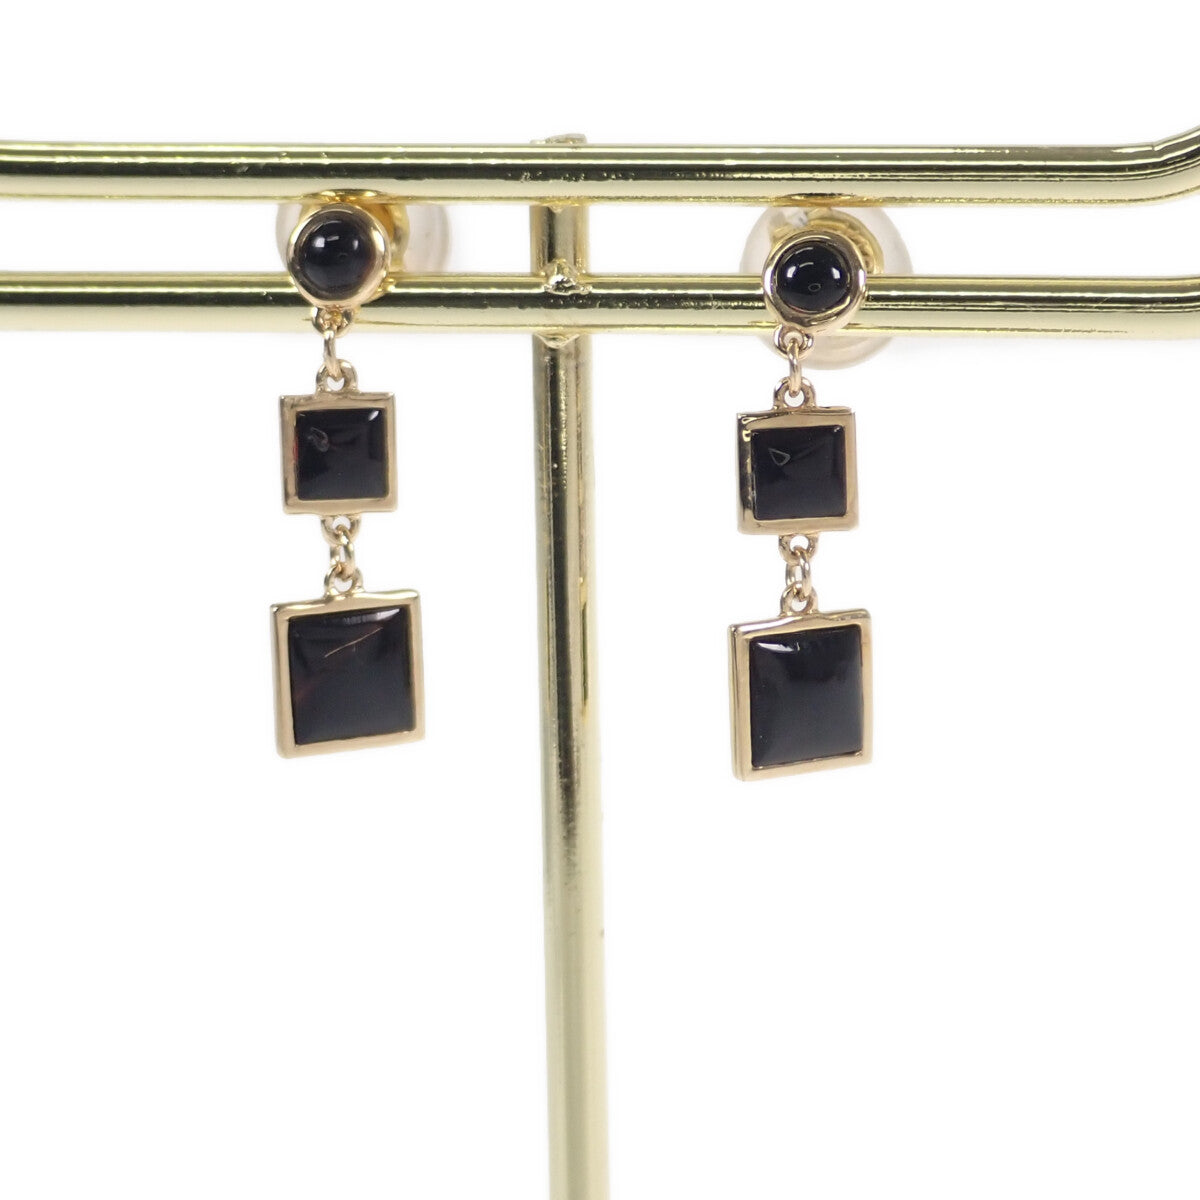 [LuxUness]  K18 Yellow Gold & Onyx Square Design Earrings for Women - New & Unused in Brand new